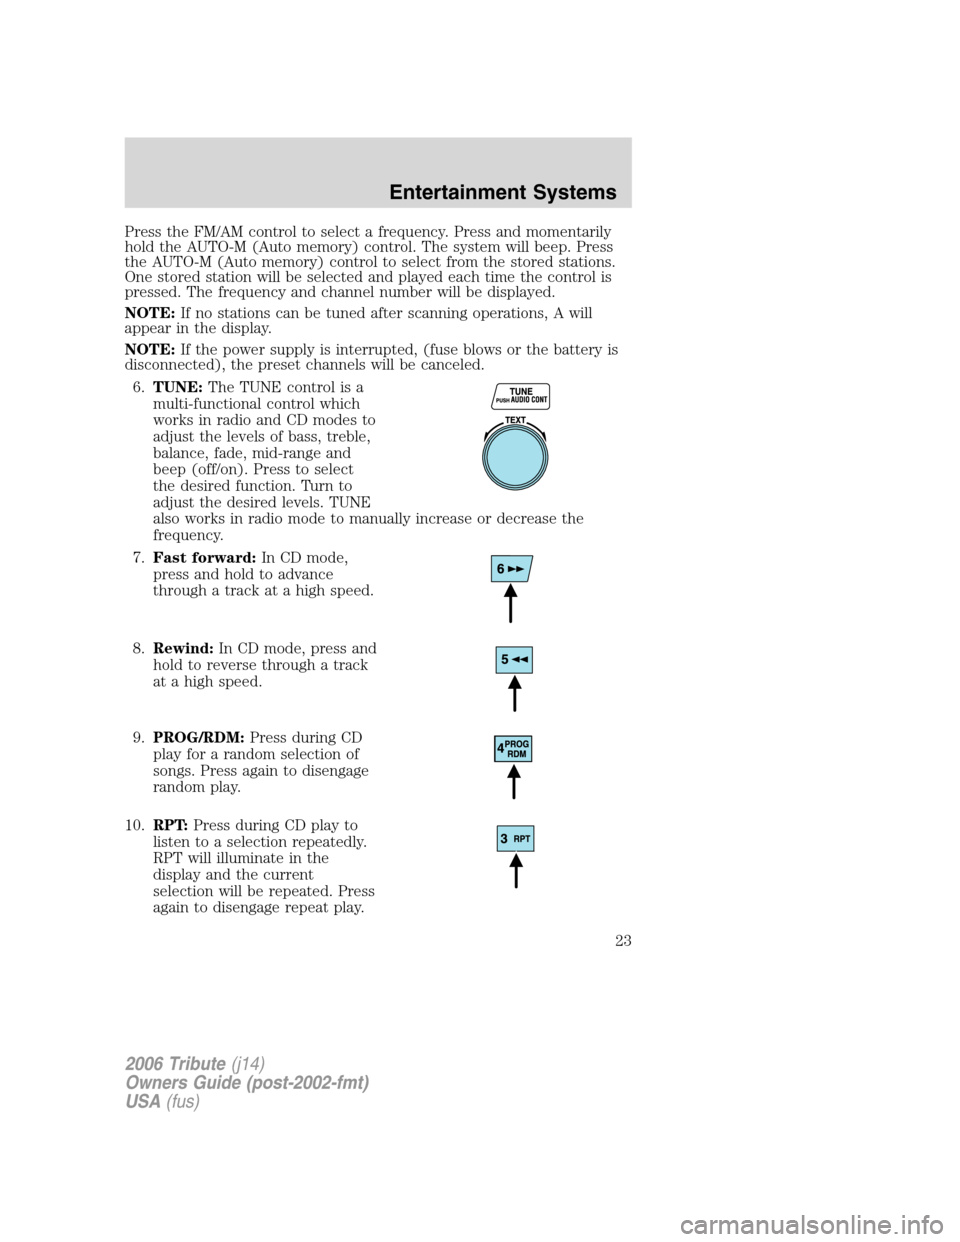 MAZDA MODEL TRIBUTE 2006  Owners Manual (in English) 
Press the FM/AM control to select a frequency. Press and momentarily
hold the AUTO-M (Auto memory) control. The system will beep. Press
the AUTO-M (Auto memory) control to select from the stored stat